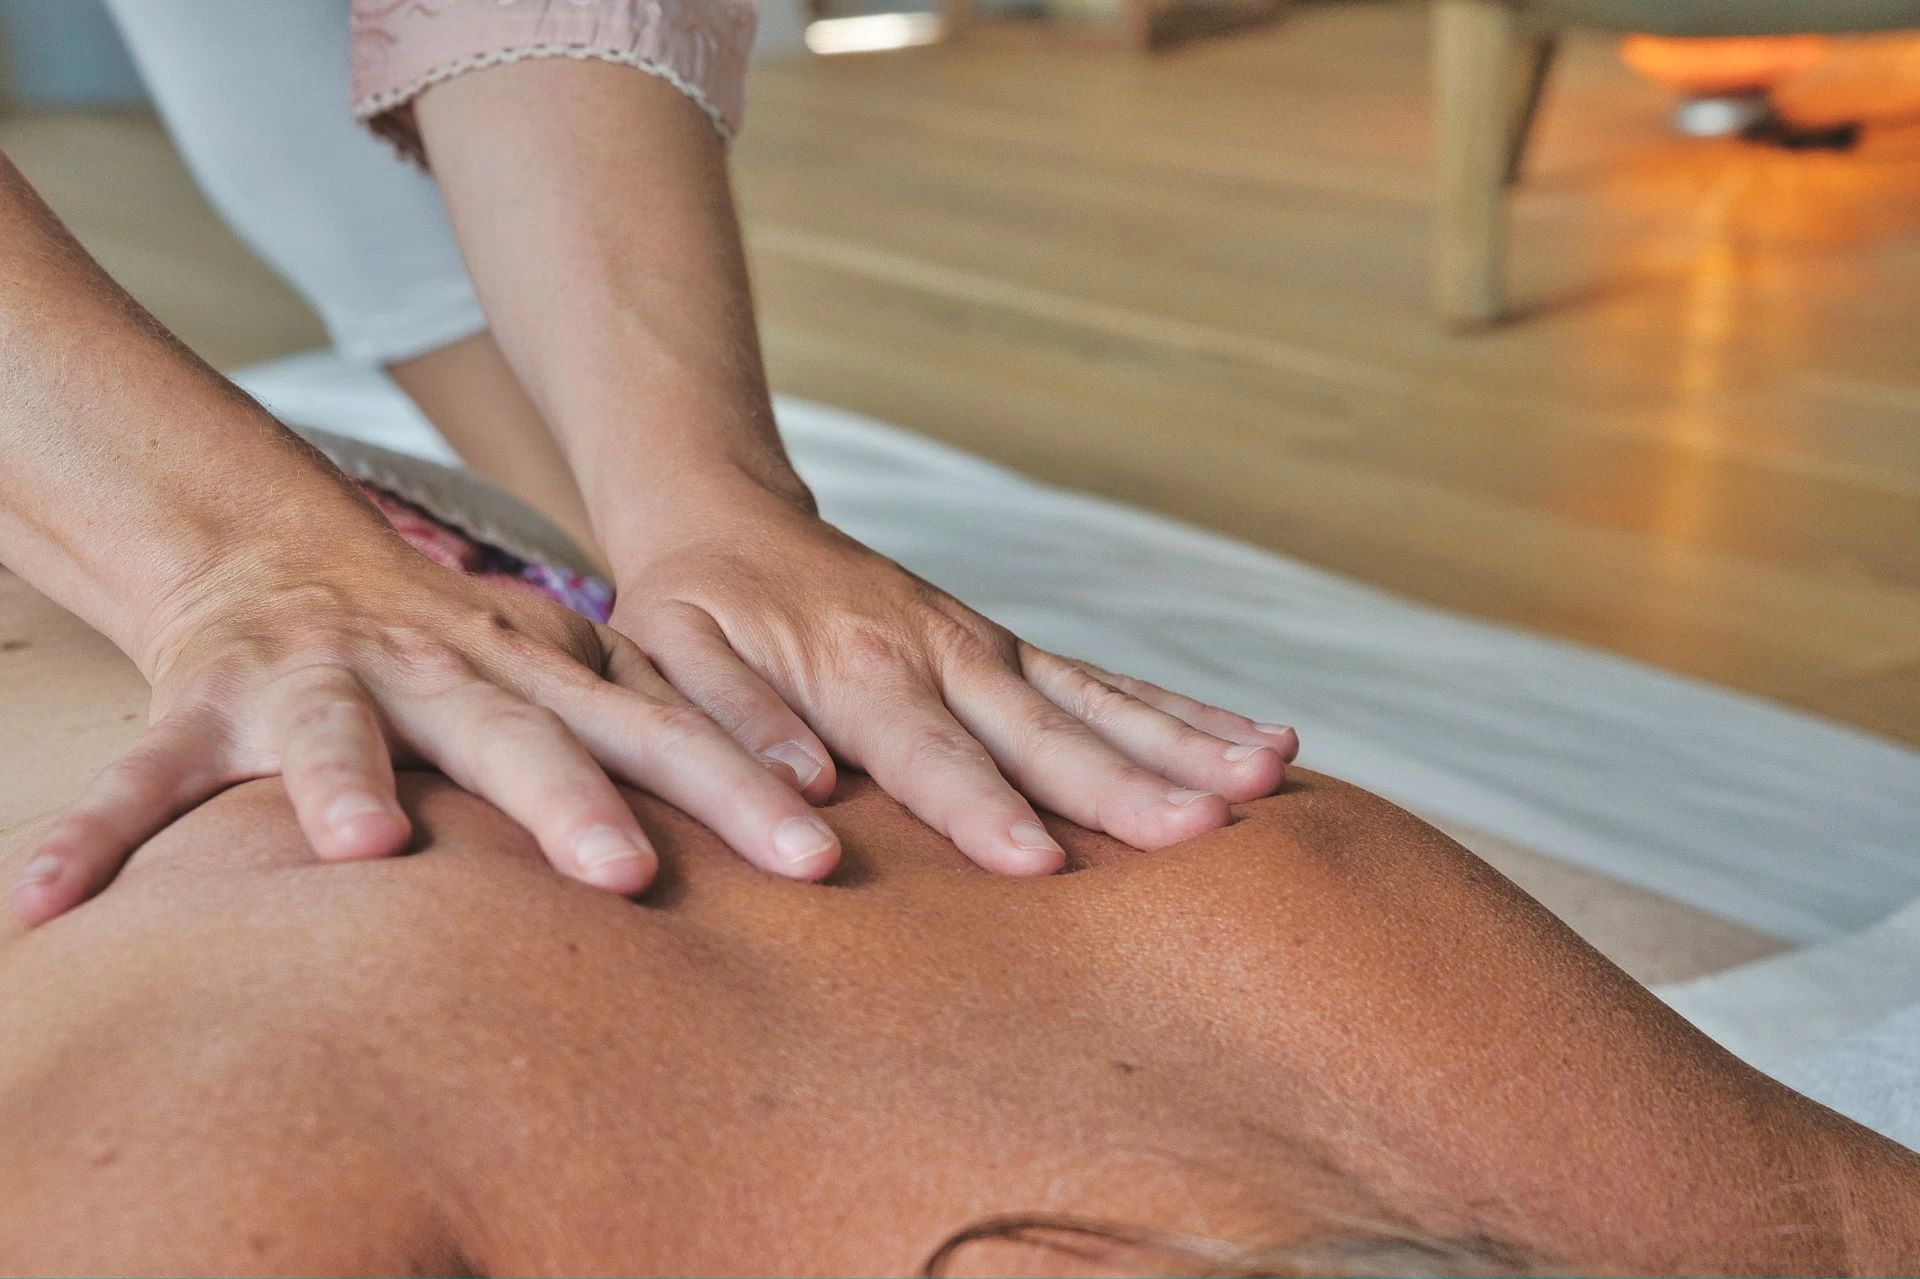 Discover The Ultimate Guide To Finding An Independent Massage Provider